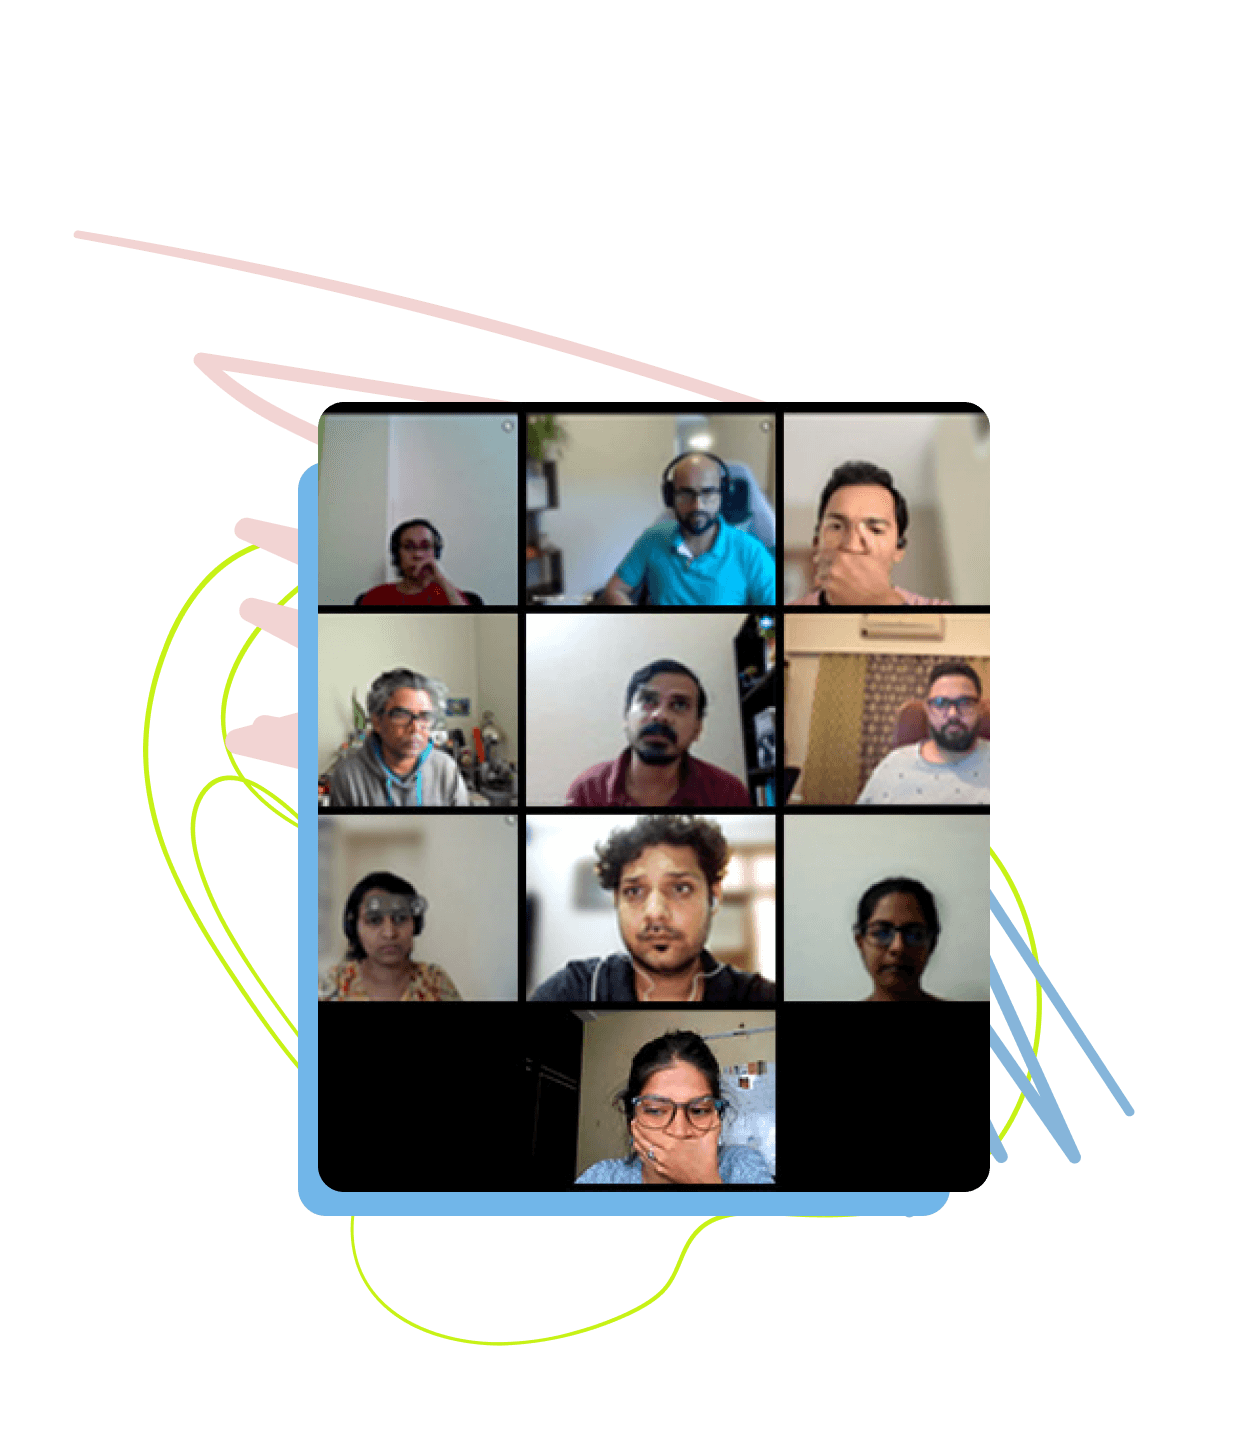 The Scribble Data team